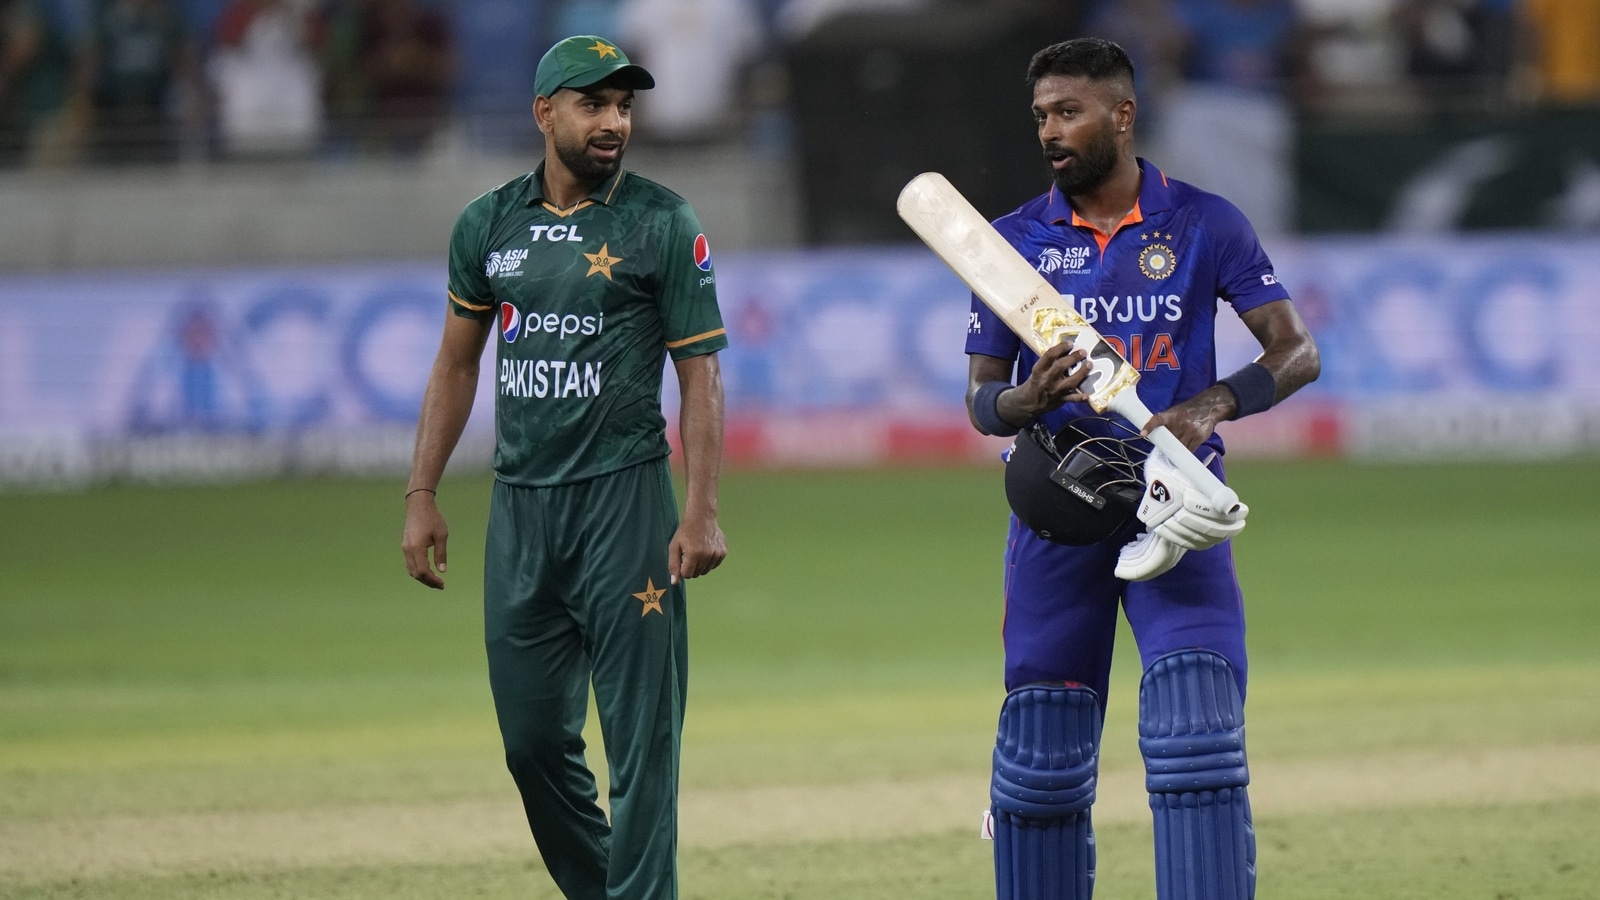 The former Pakistan cricketers argue over Haris Rauf's performance aga...